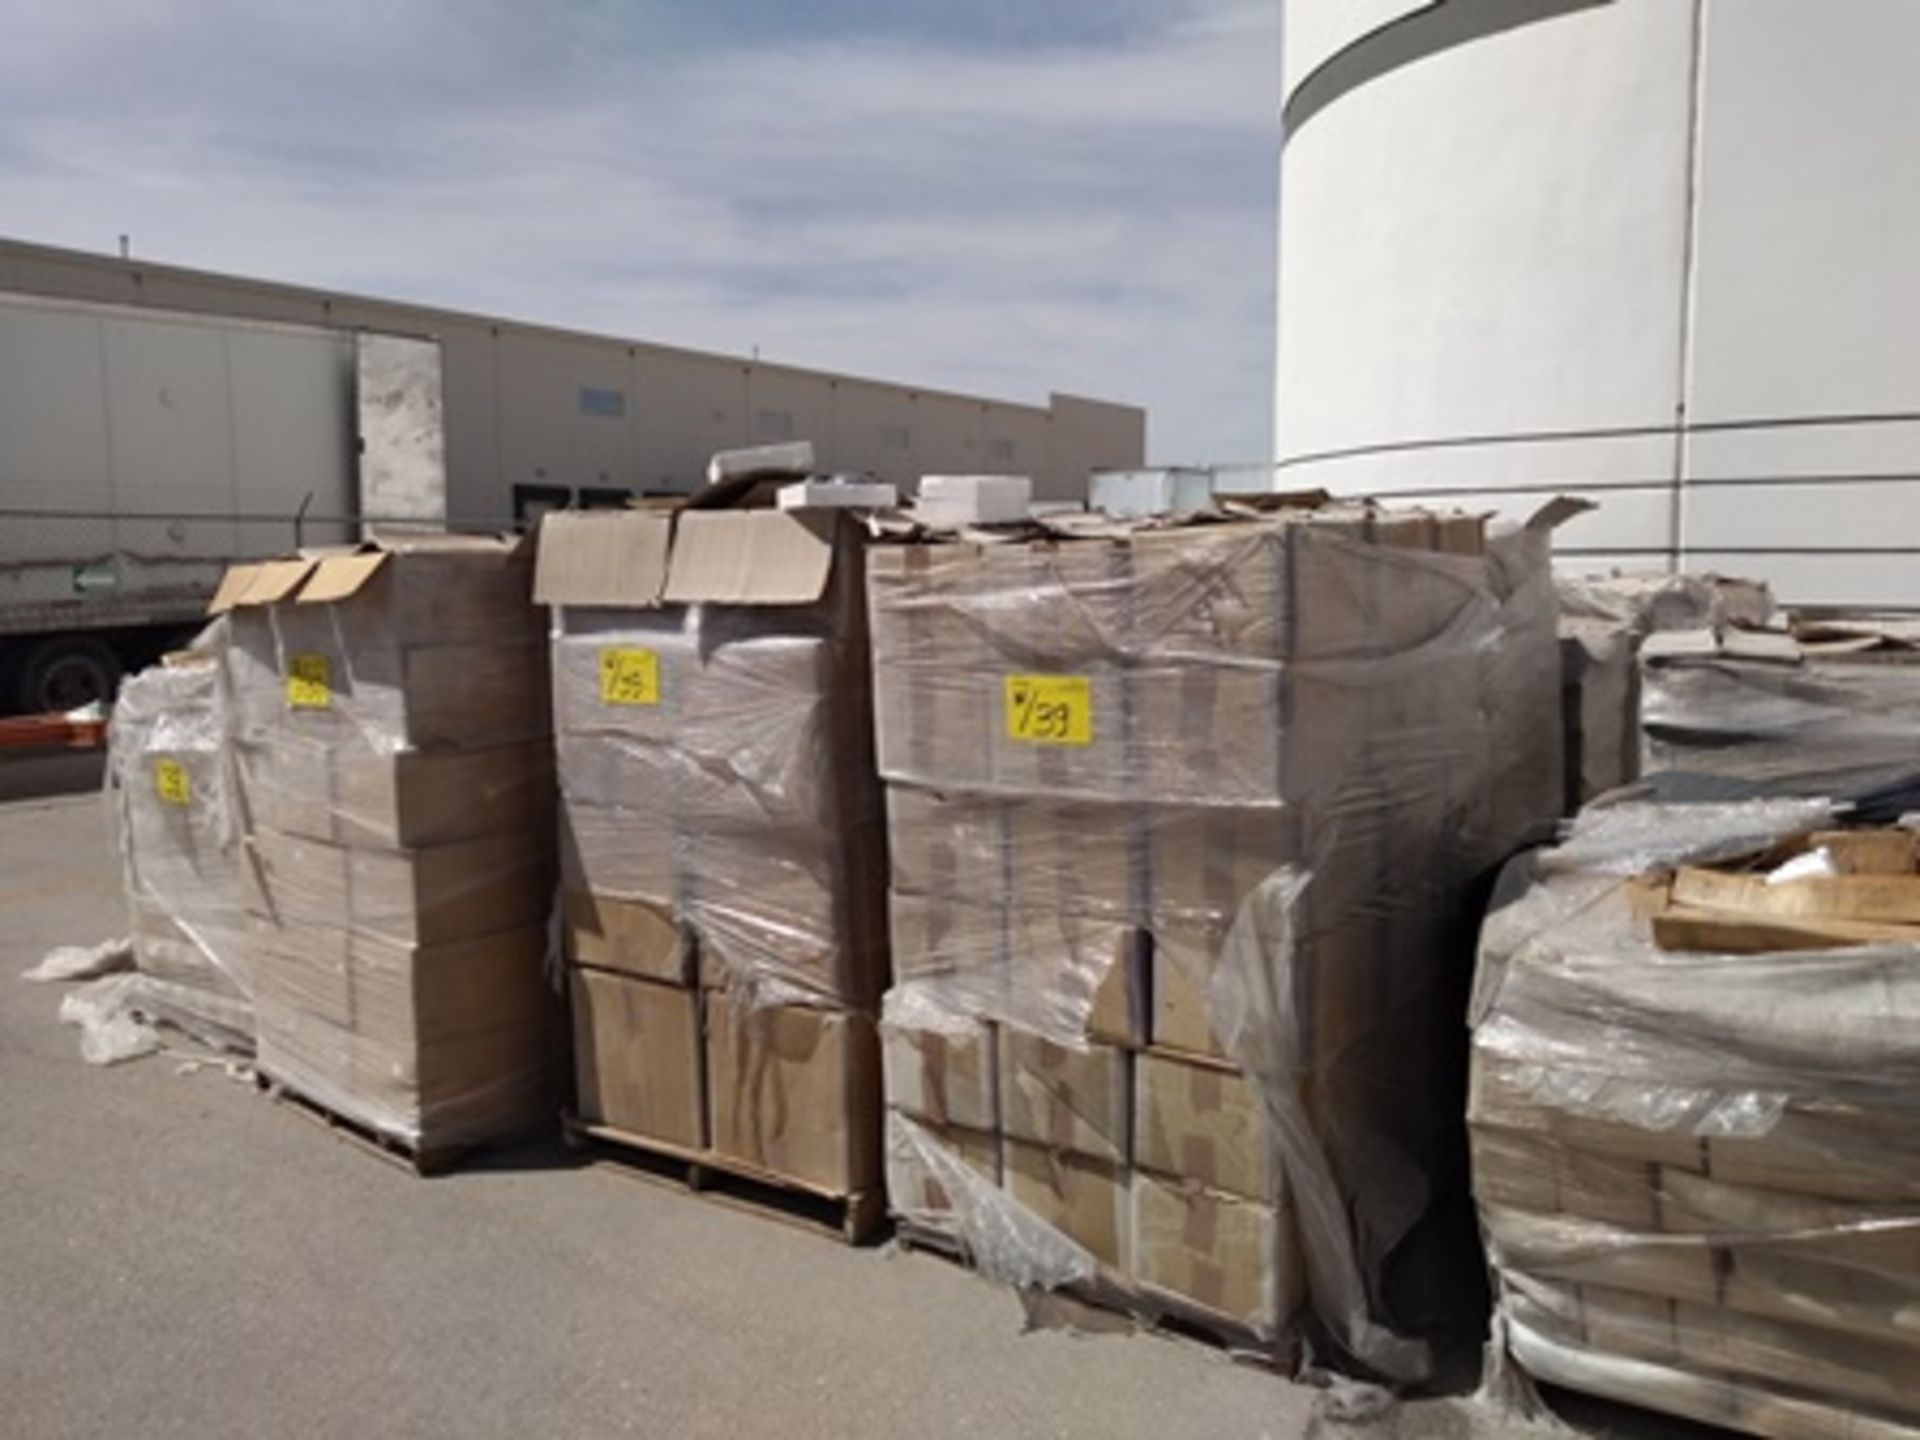 18 pallets containing: 600 boxes of finished product (egraved and shaped esteatita stones). - Image 15 of 27